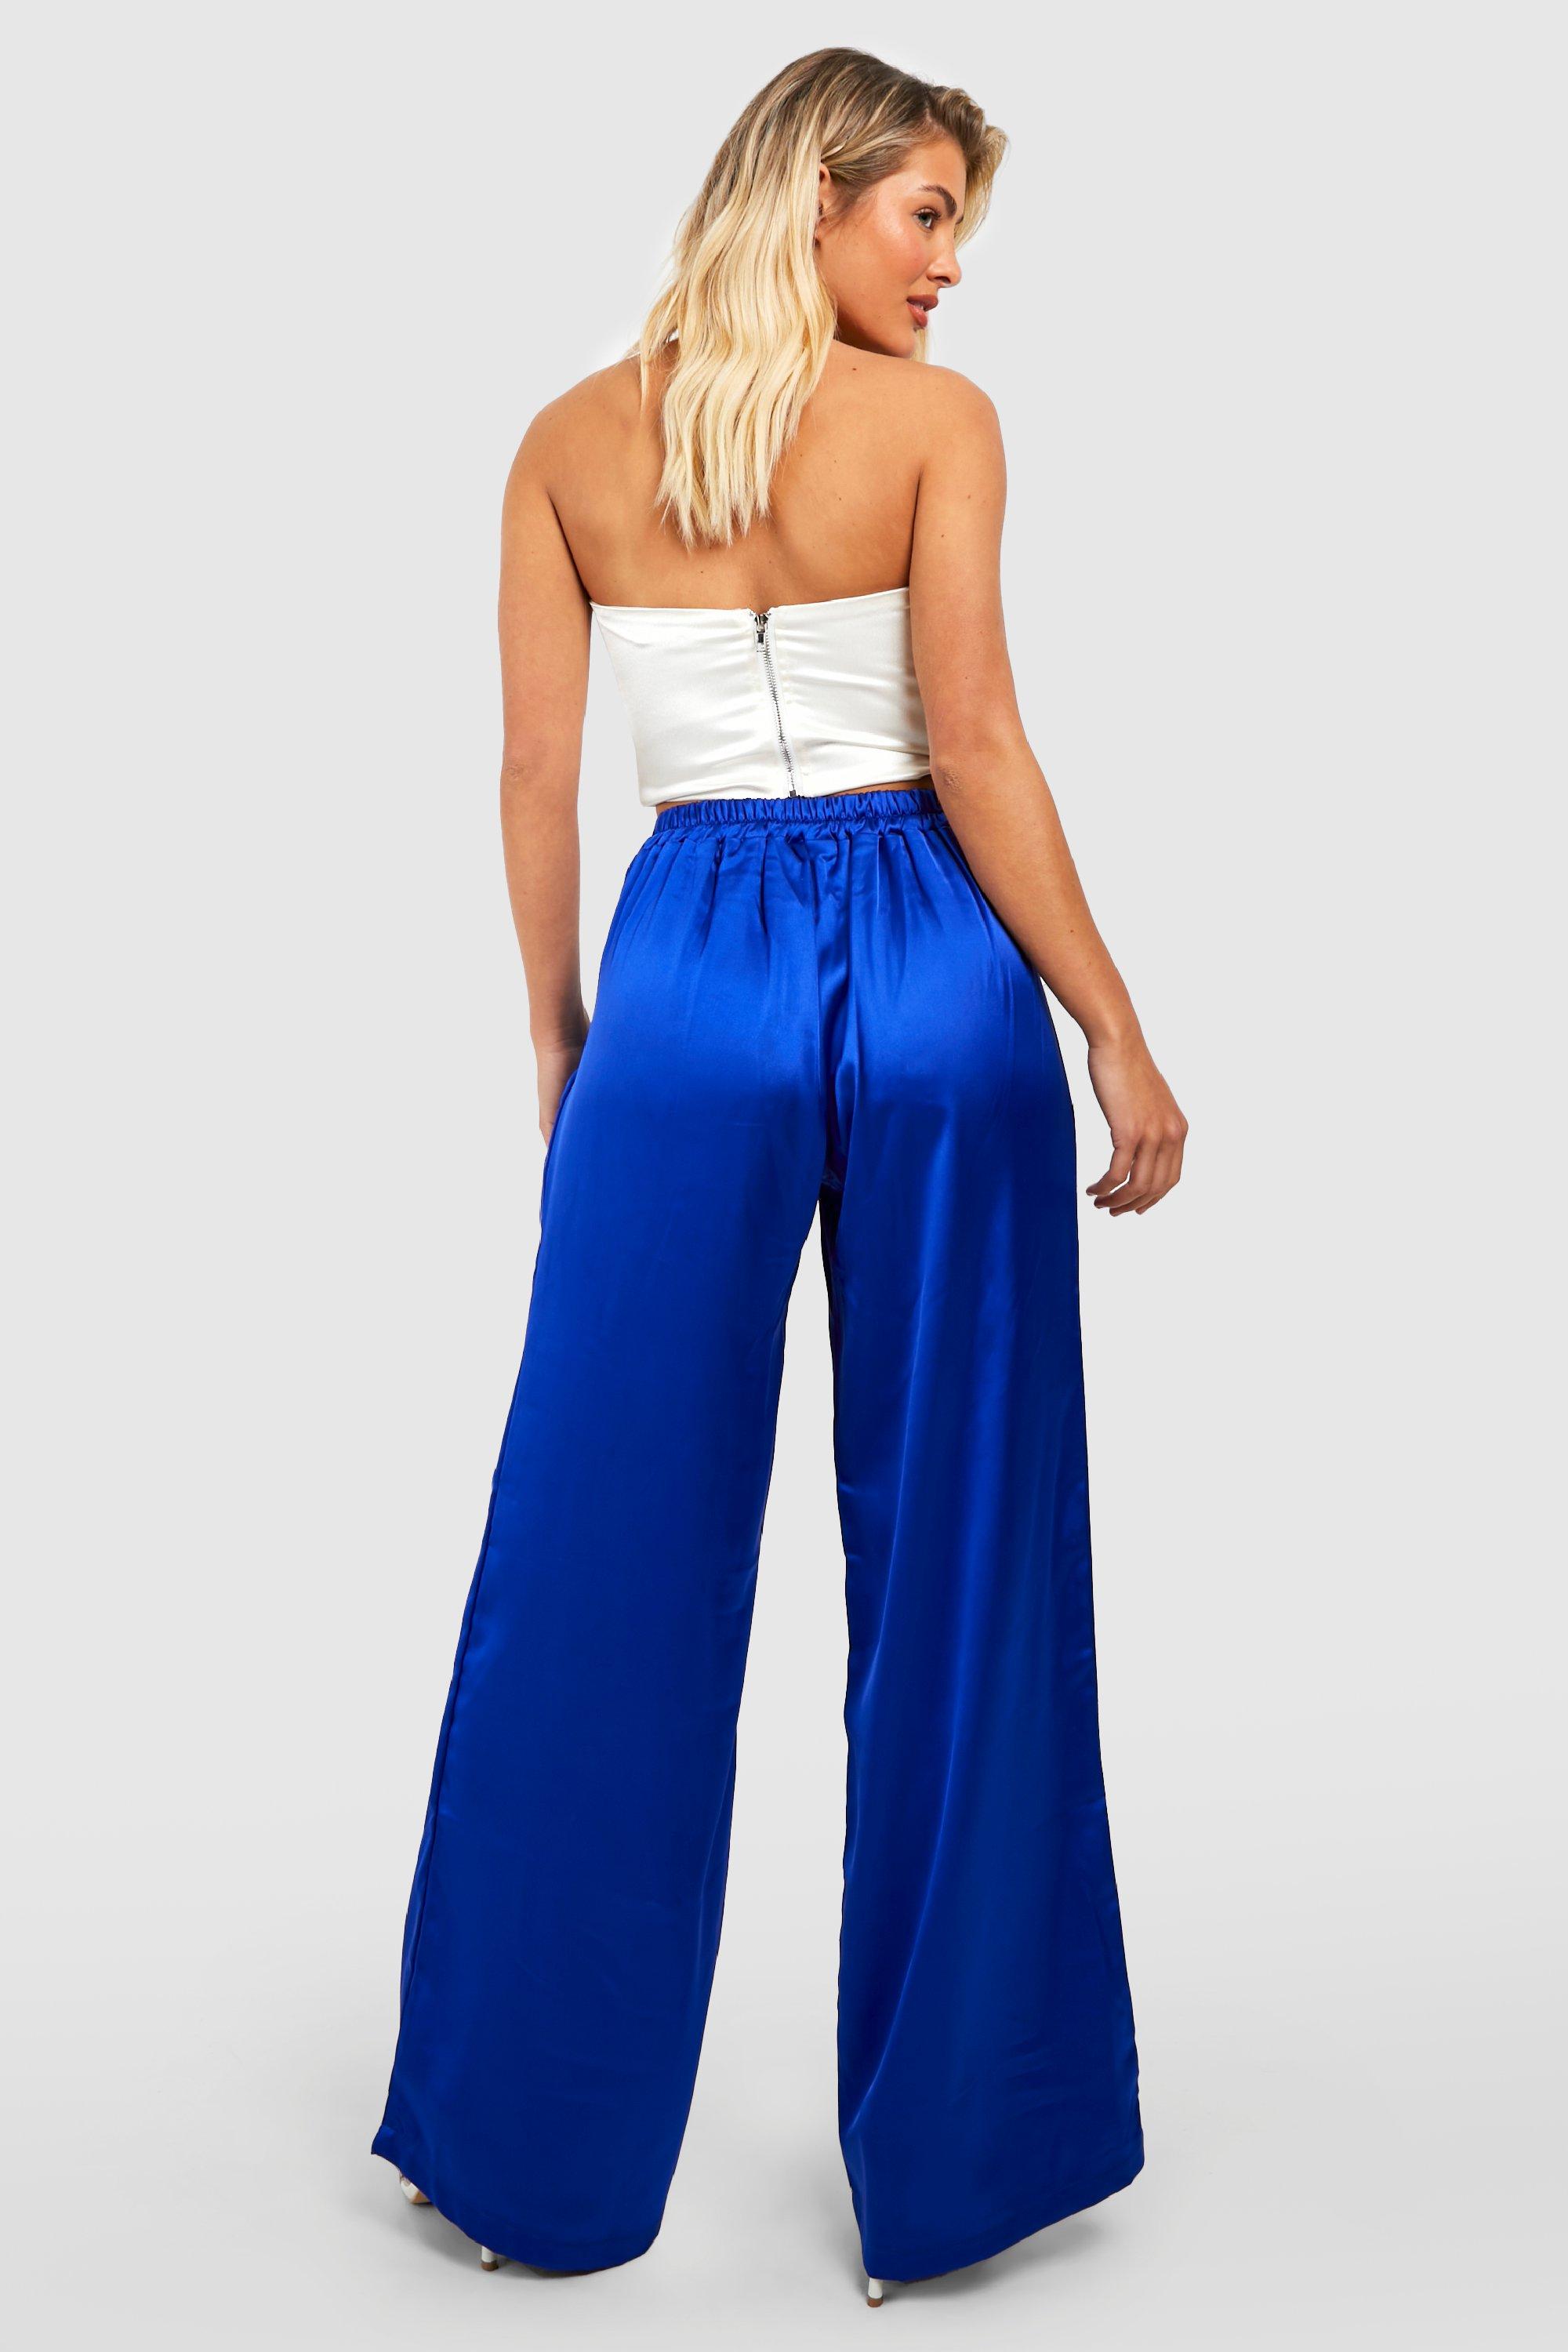  XIALON Women's Dress Solid Zip Up Straight Leg Pants (Color : Royal  Blue, Size : Large) : Clothing, Shoes & Jewelry